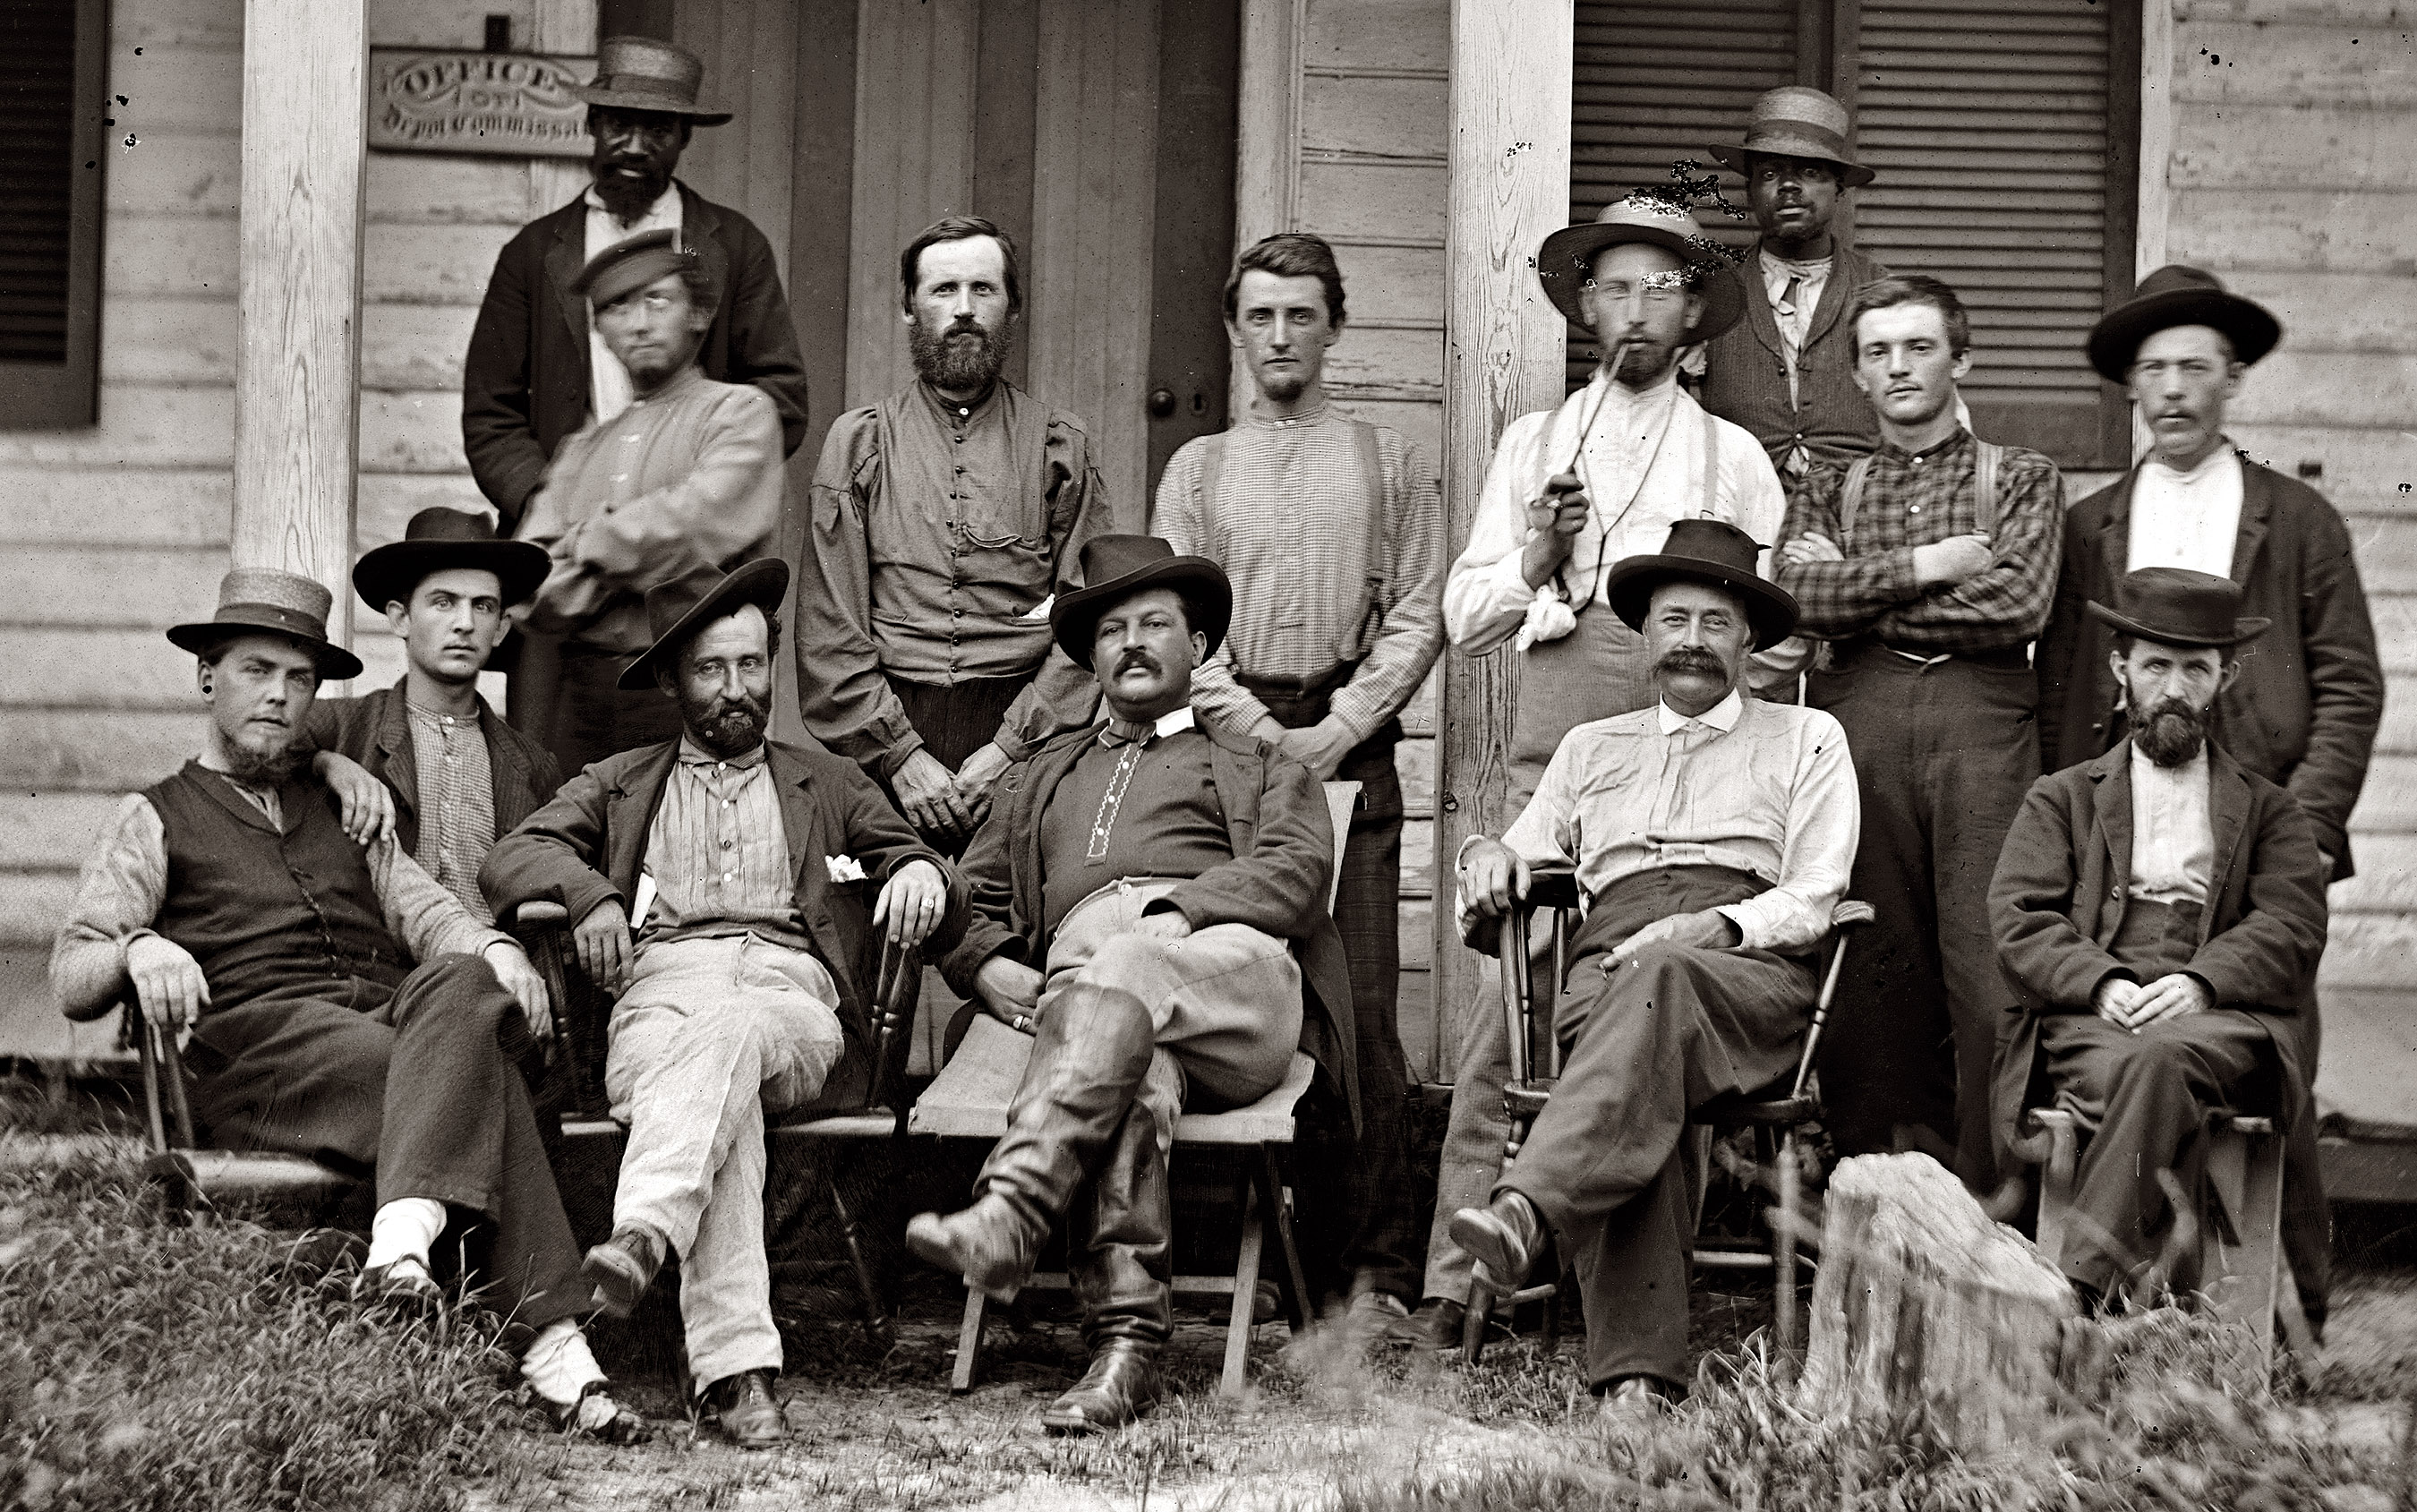 A closeup of the gents in the 1864 Civil War photo two doors down. An interesting variety of smoking materials, headgear and footwear. View full size.